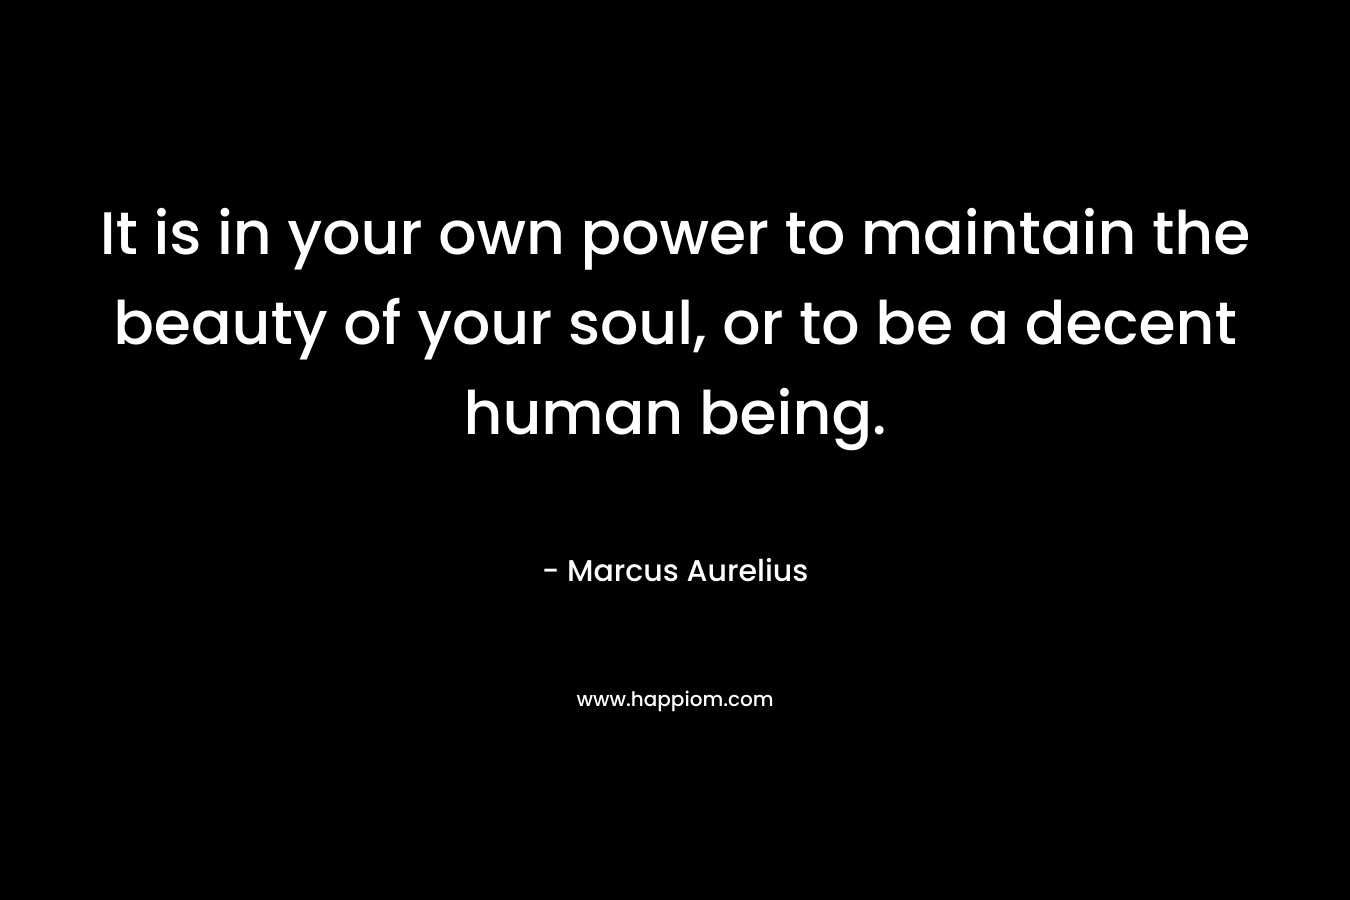 It is in your own power to maintain the beauty of your soul, or to be a decent human being. – Marcus Aurelius